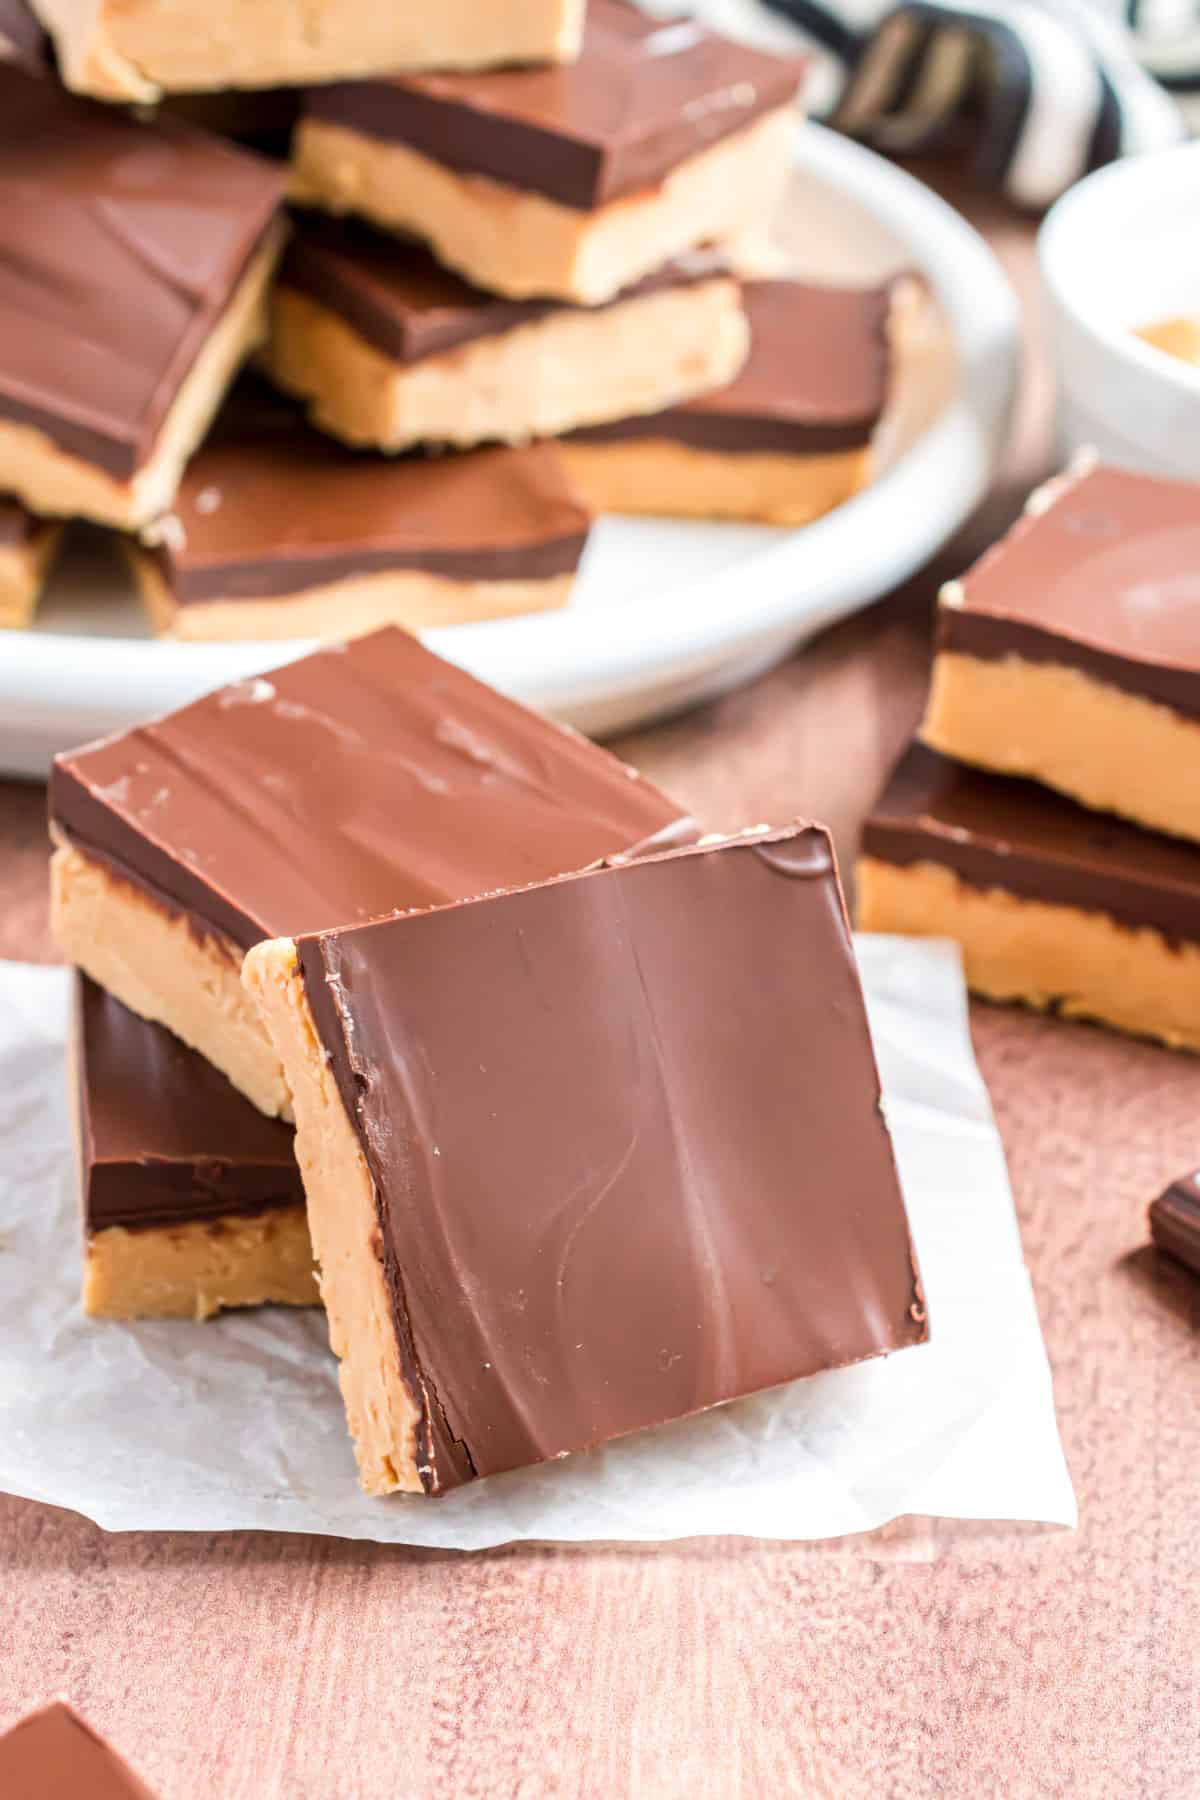 Buckeye bars stacked on white parchment paper.